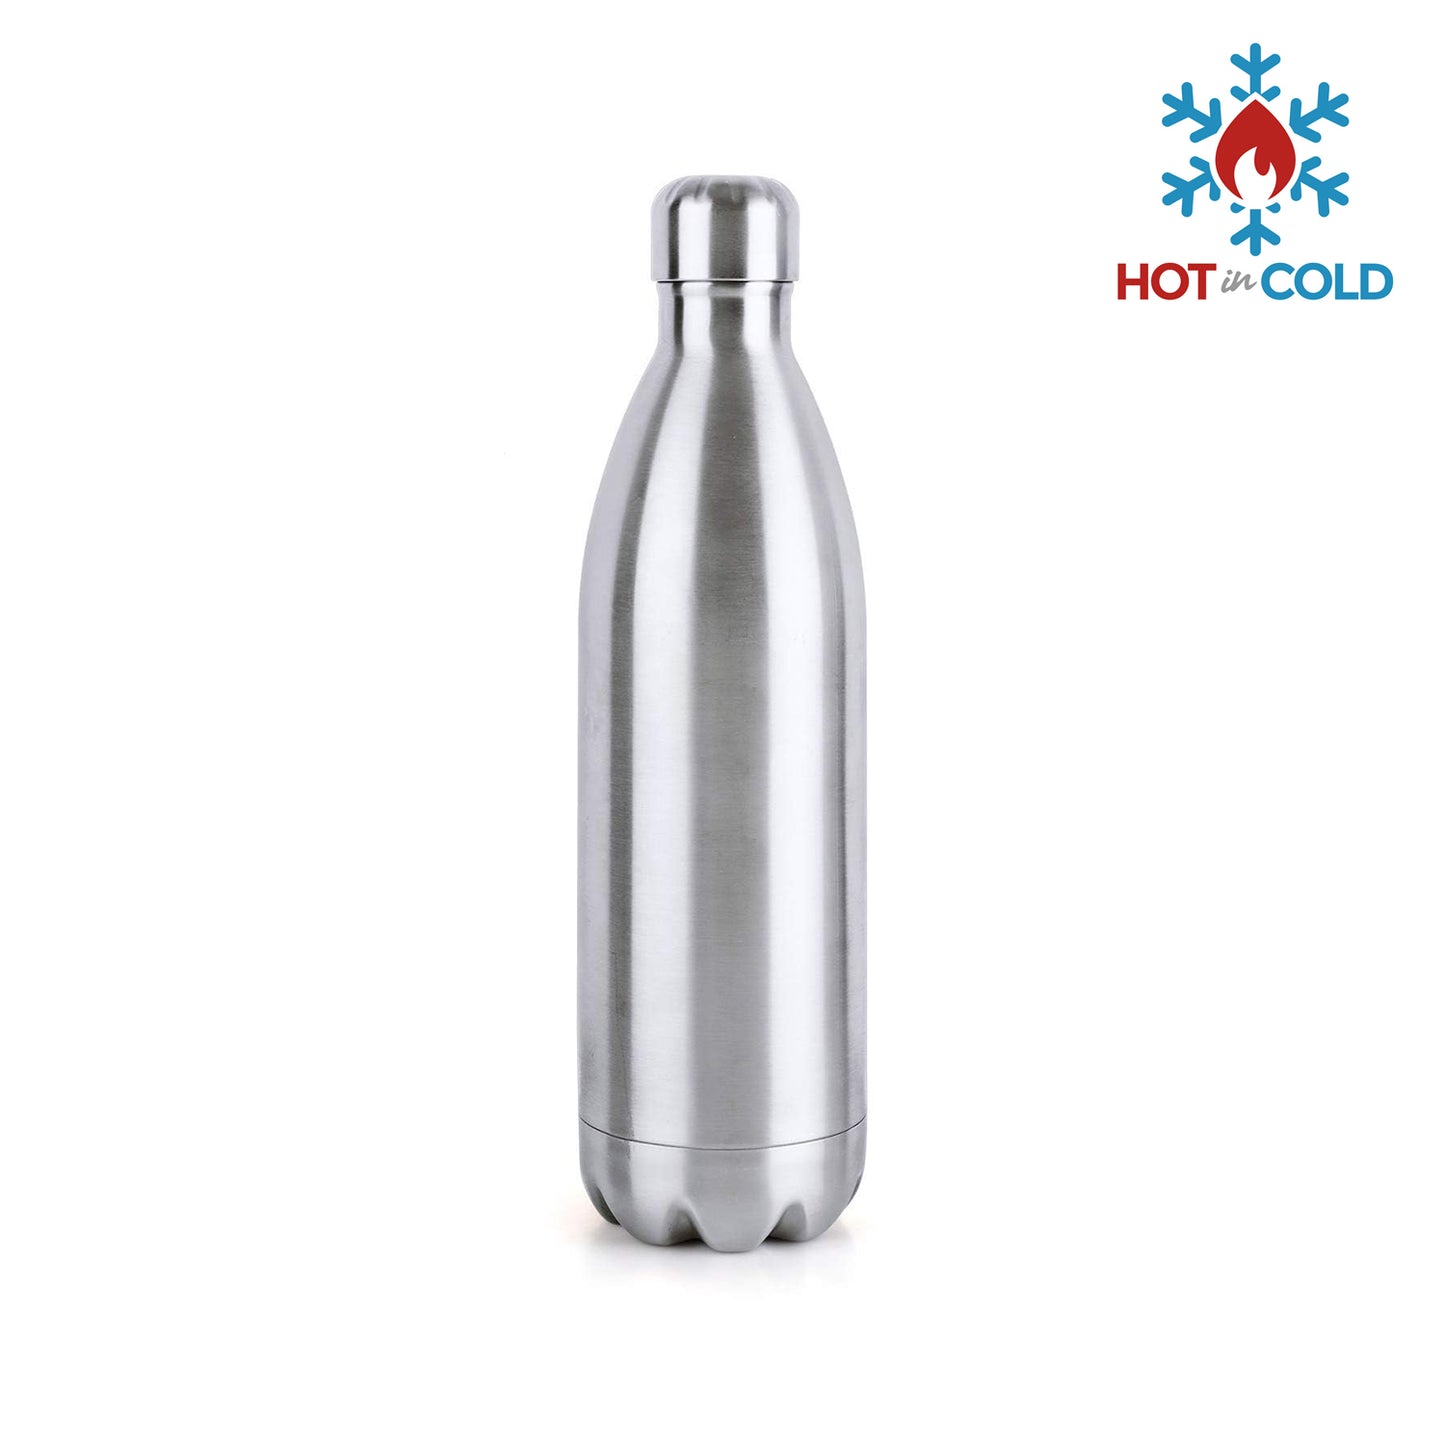 3874 Stainless Steel Hot or Cold Double Walled Flask Bottle 500 ml, Silver